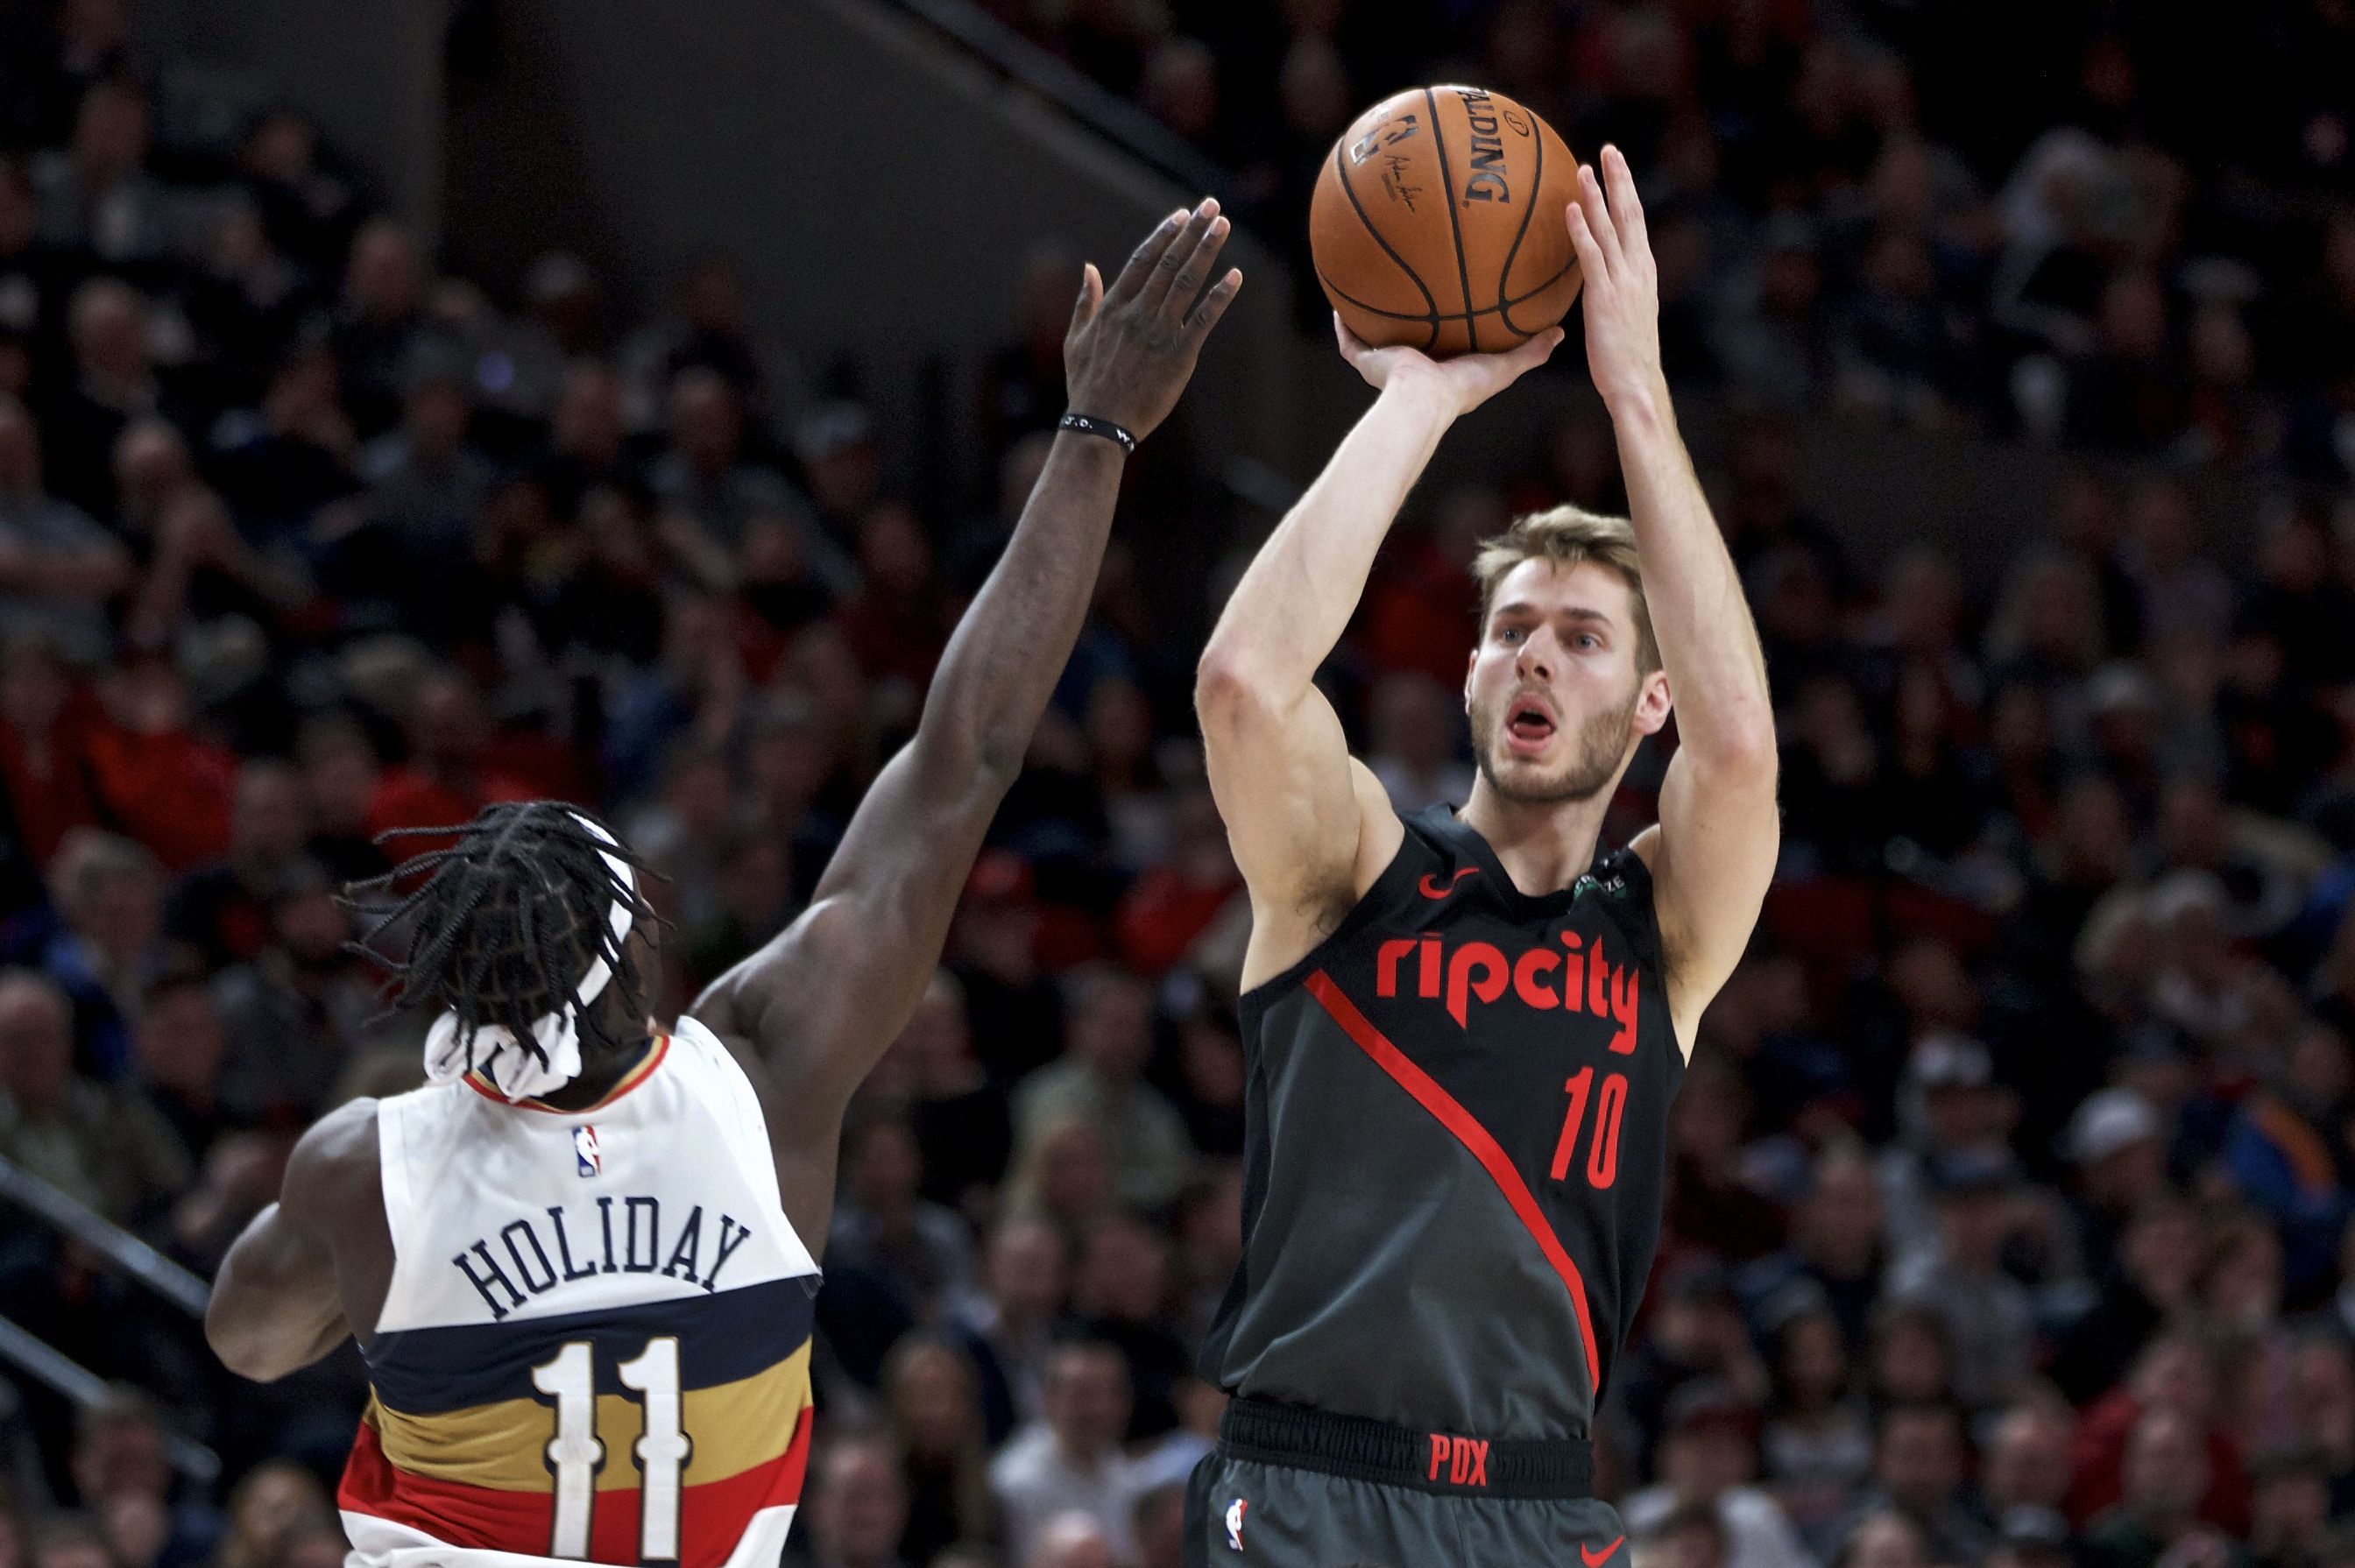 As Nba Trade Chatter Intensifies Moe Harkless And Jake Layman Put On A Show In Trail Blazers Win Over Pelicans Oregonlive Com